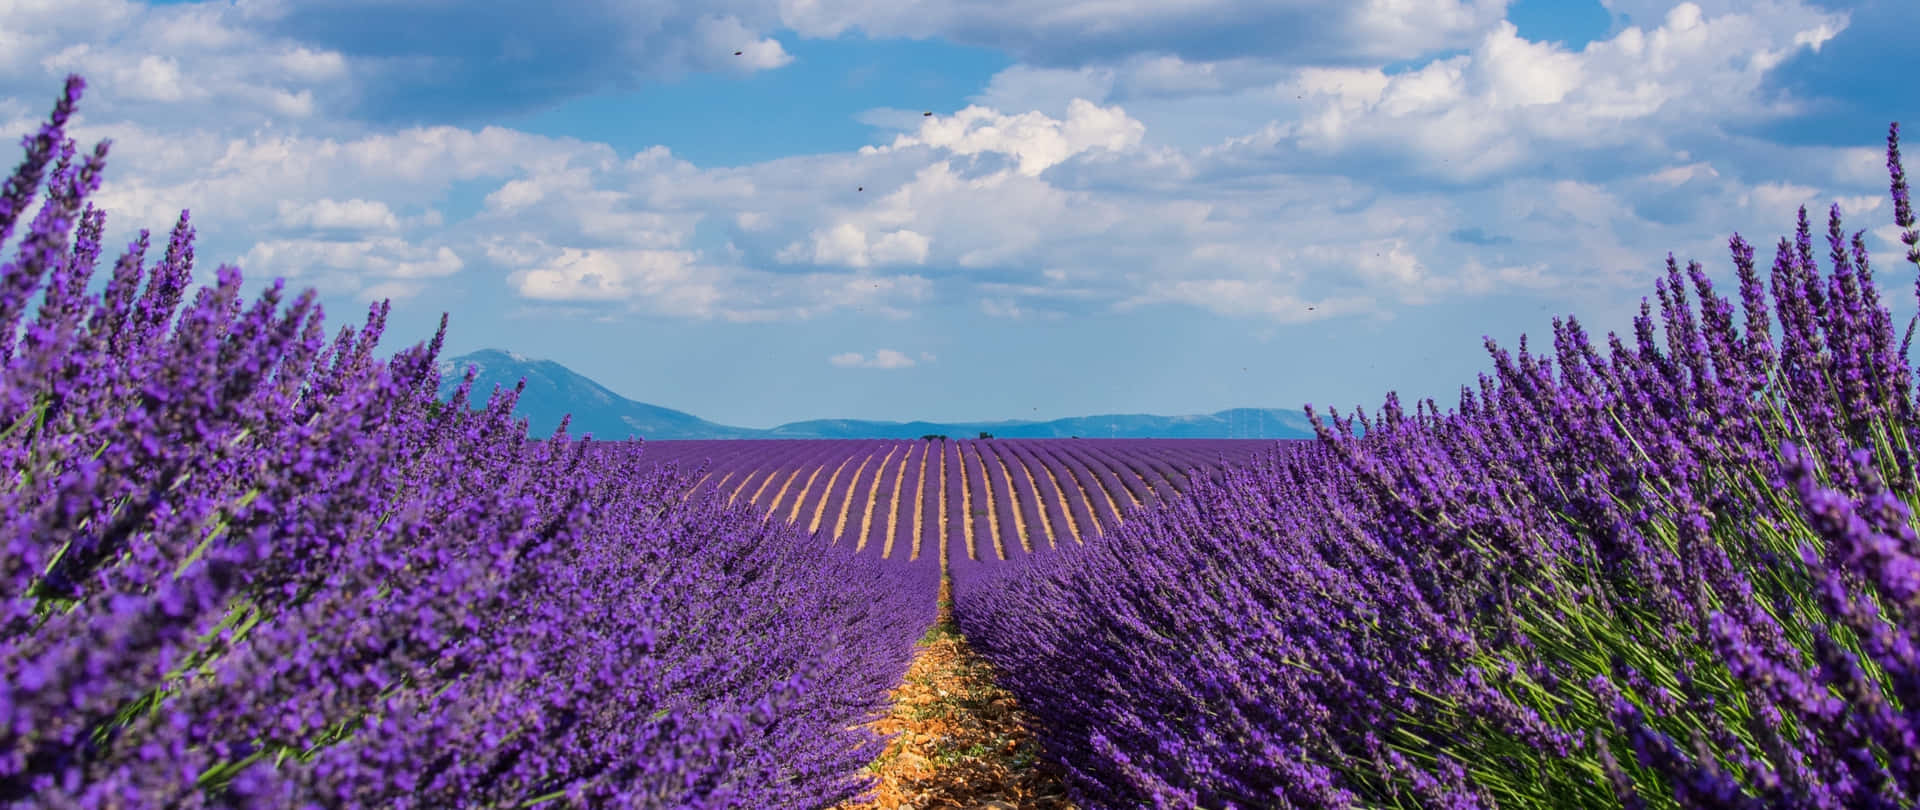 Lavender Field In The French Riviera Wallpaper